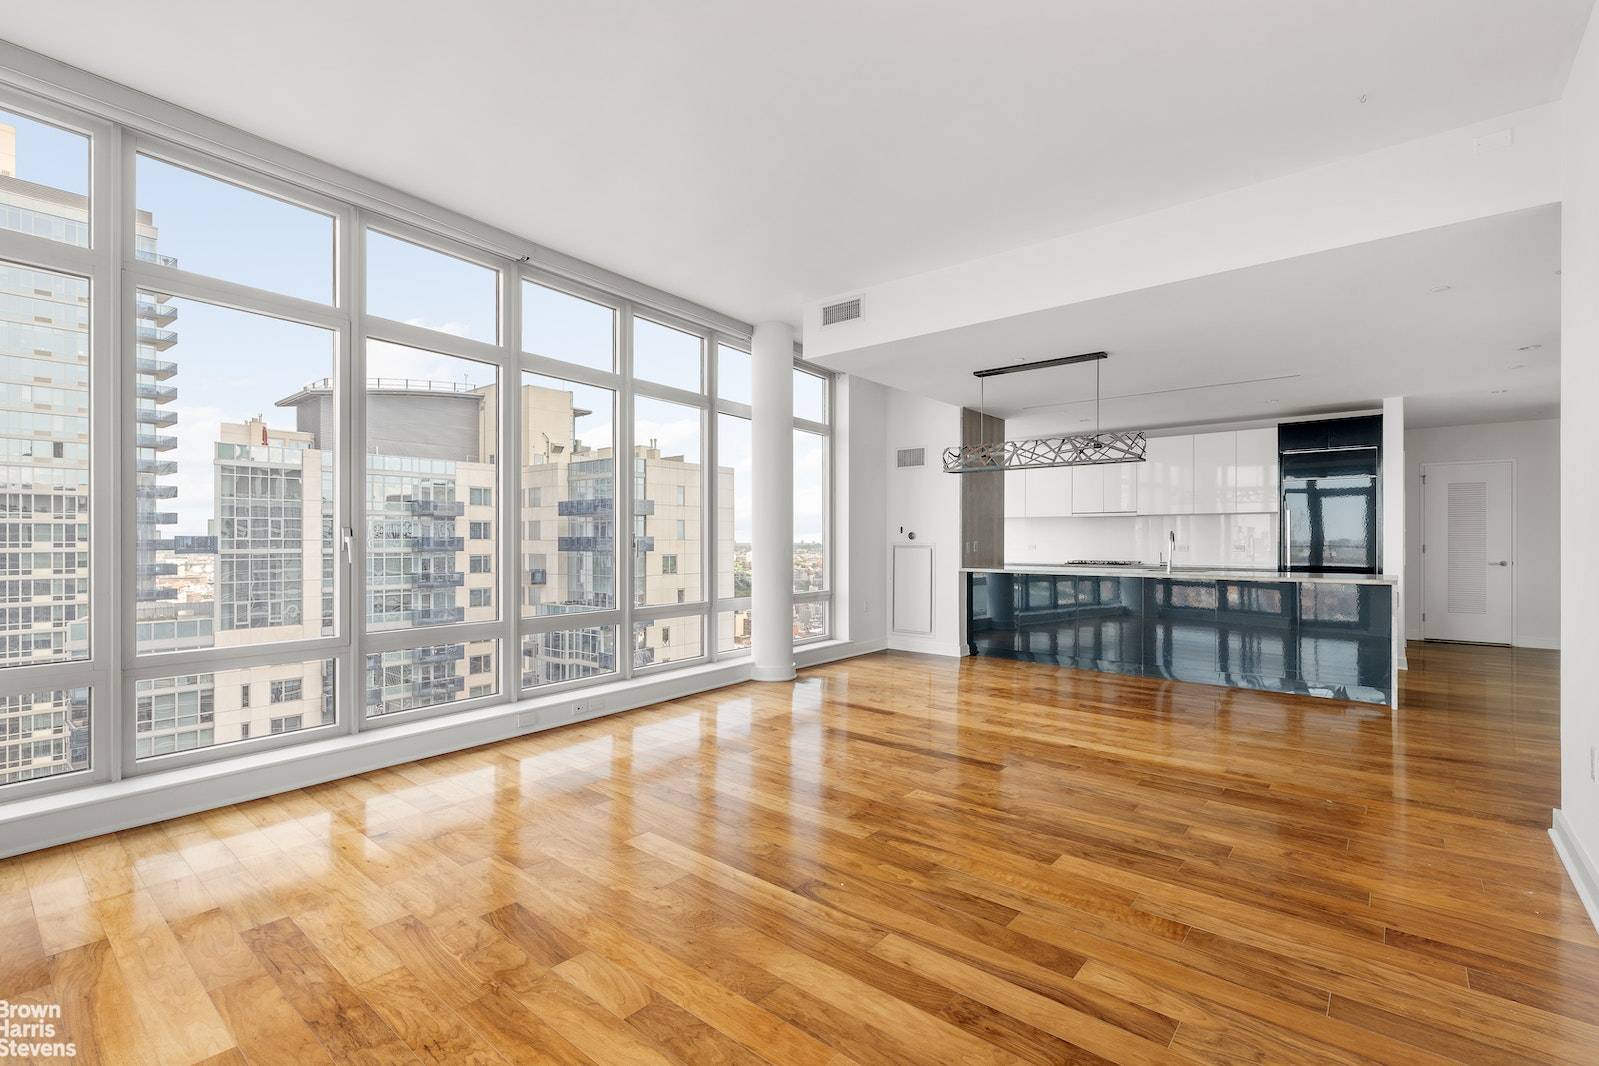 Locally regarded as the best 2 bedroom apartment in Williamsburg, this home features a private balcony, protected views of the Midtown Manhattan skyline, tax abatement until 2033, and the perfect, ...